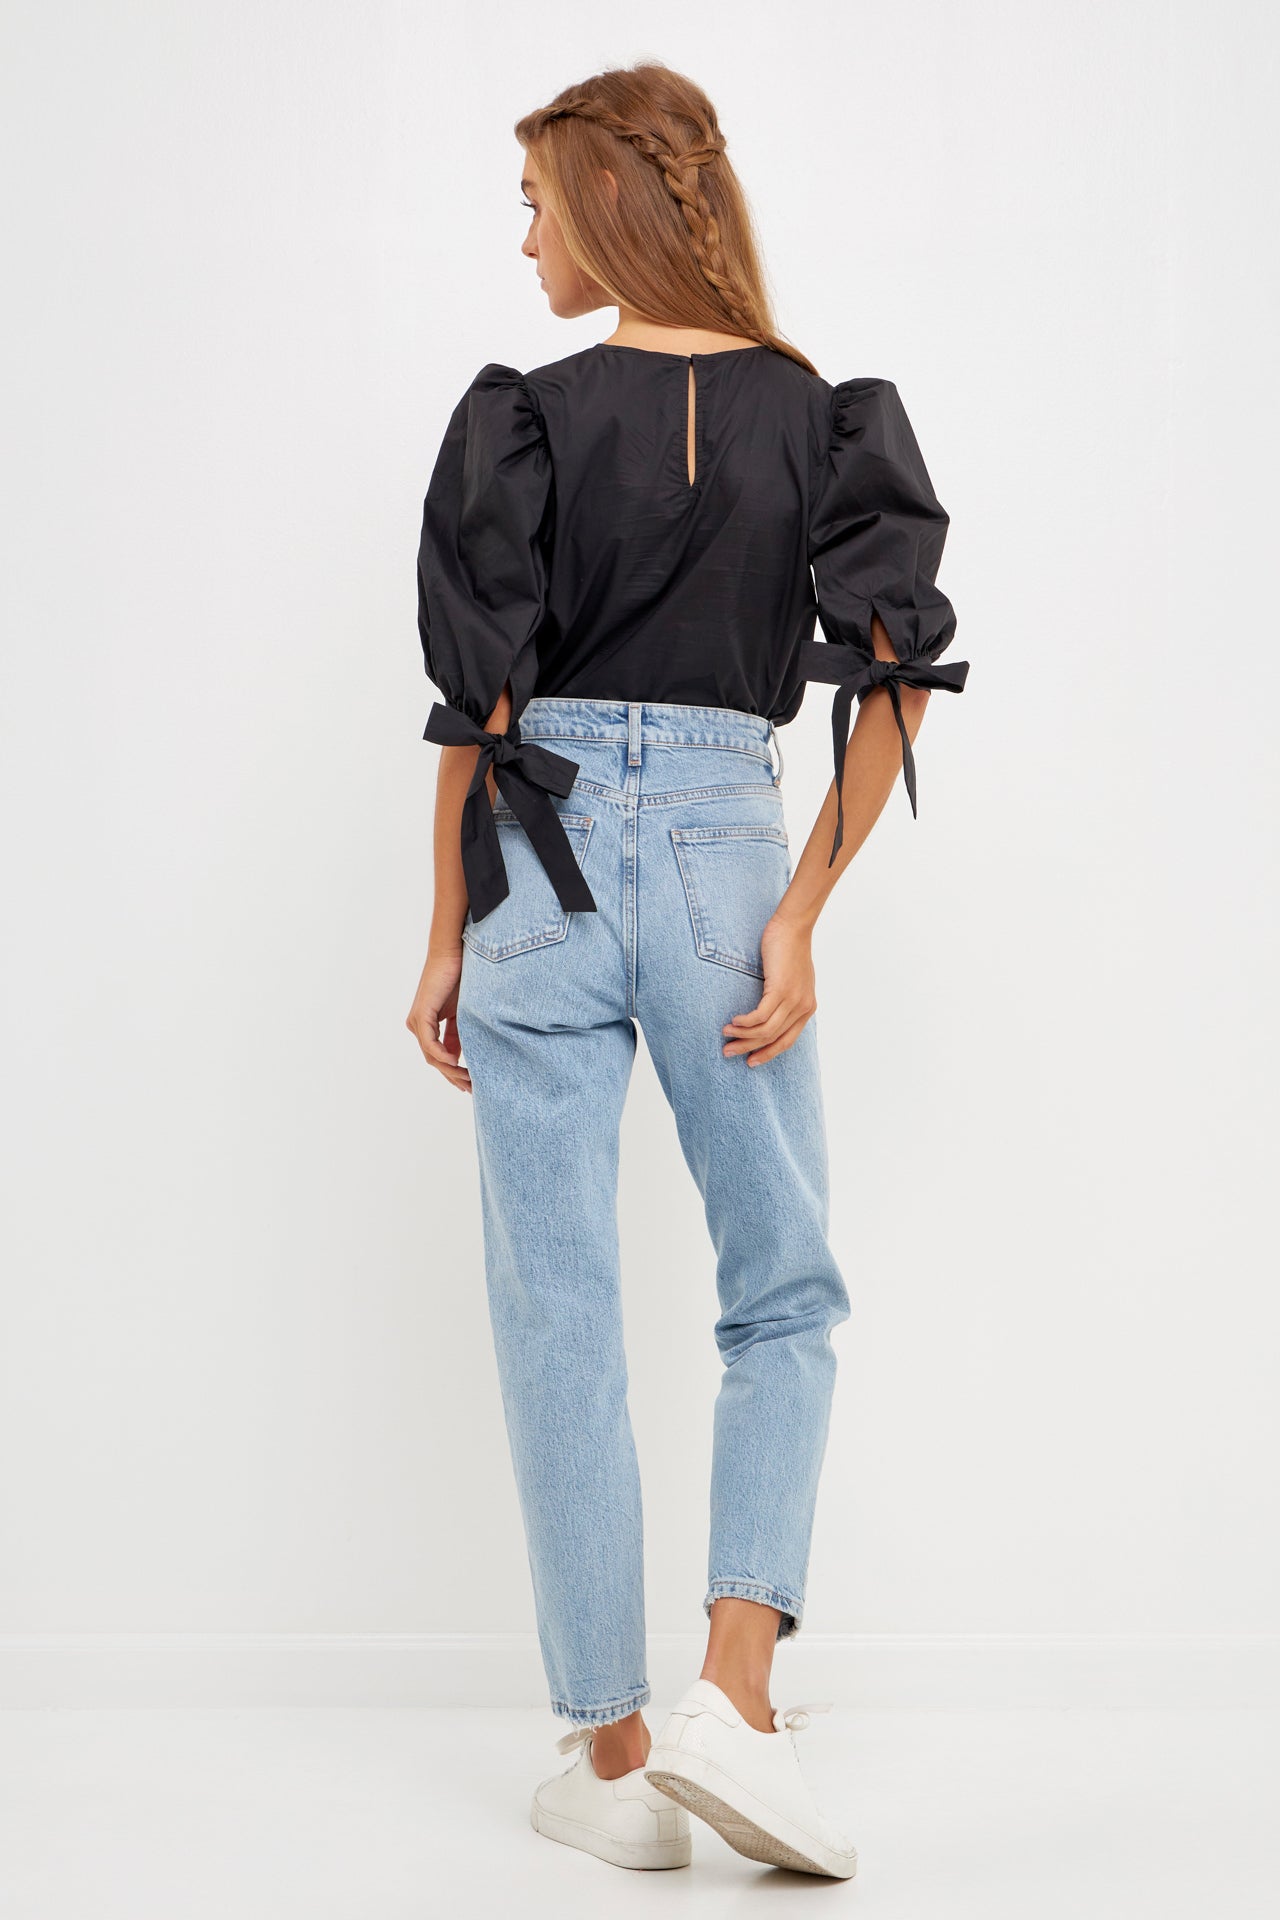 Bow Banded Blouse Black